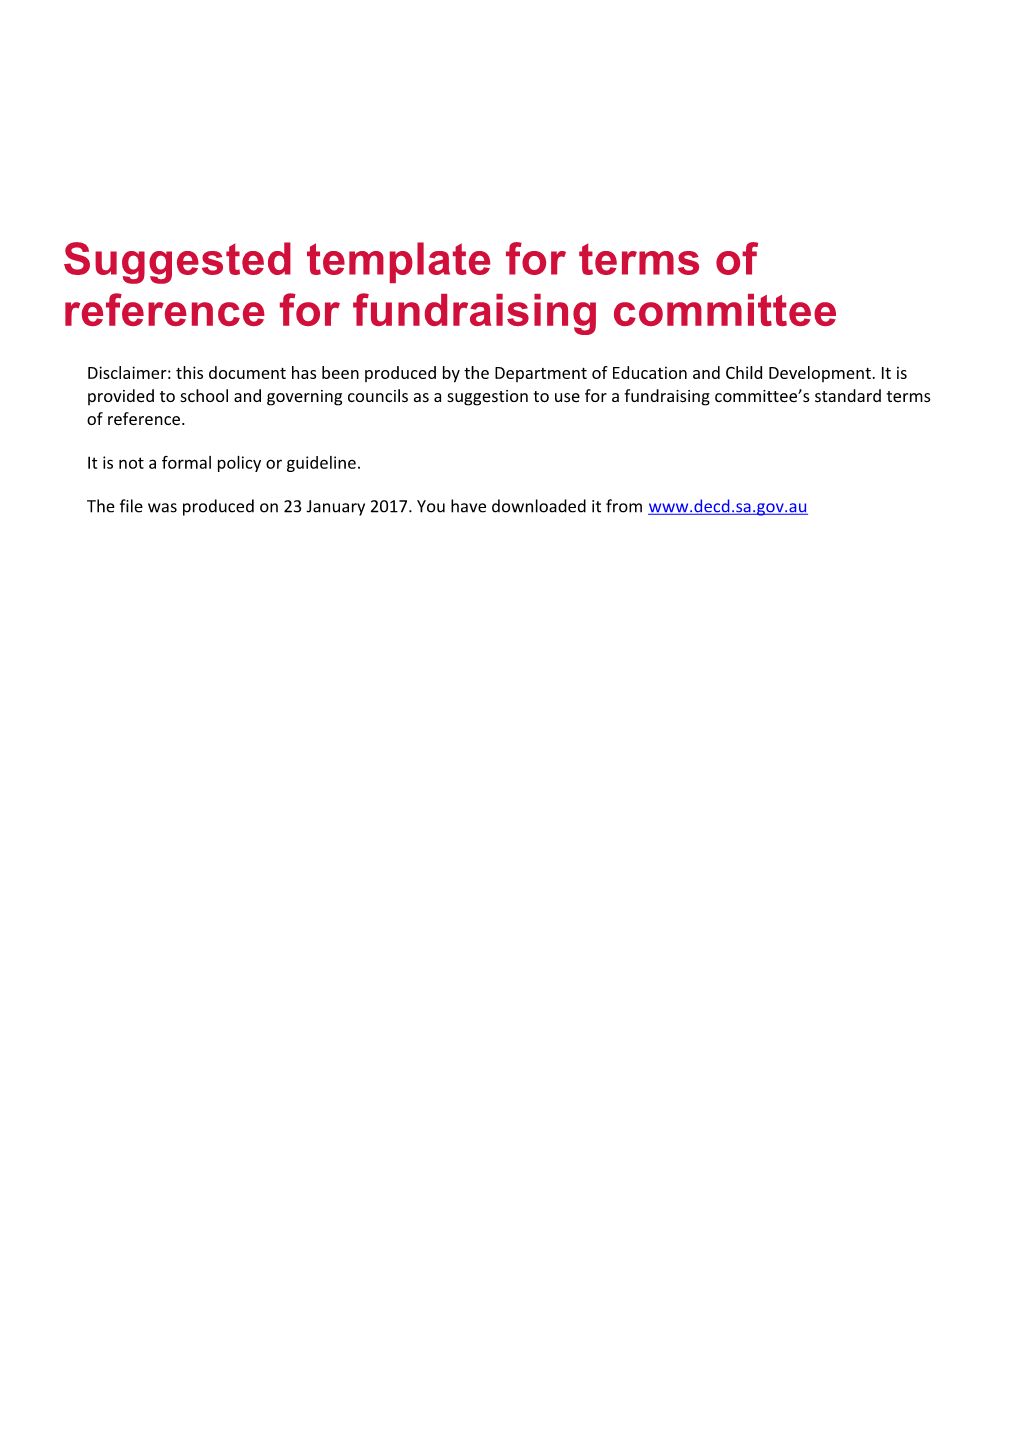 Suggested Template for Terms of Reference for Fundraising Committee